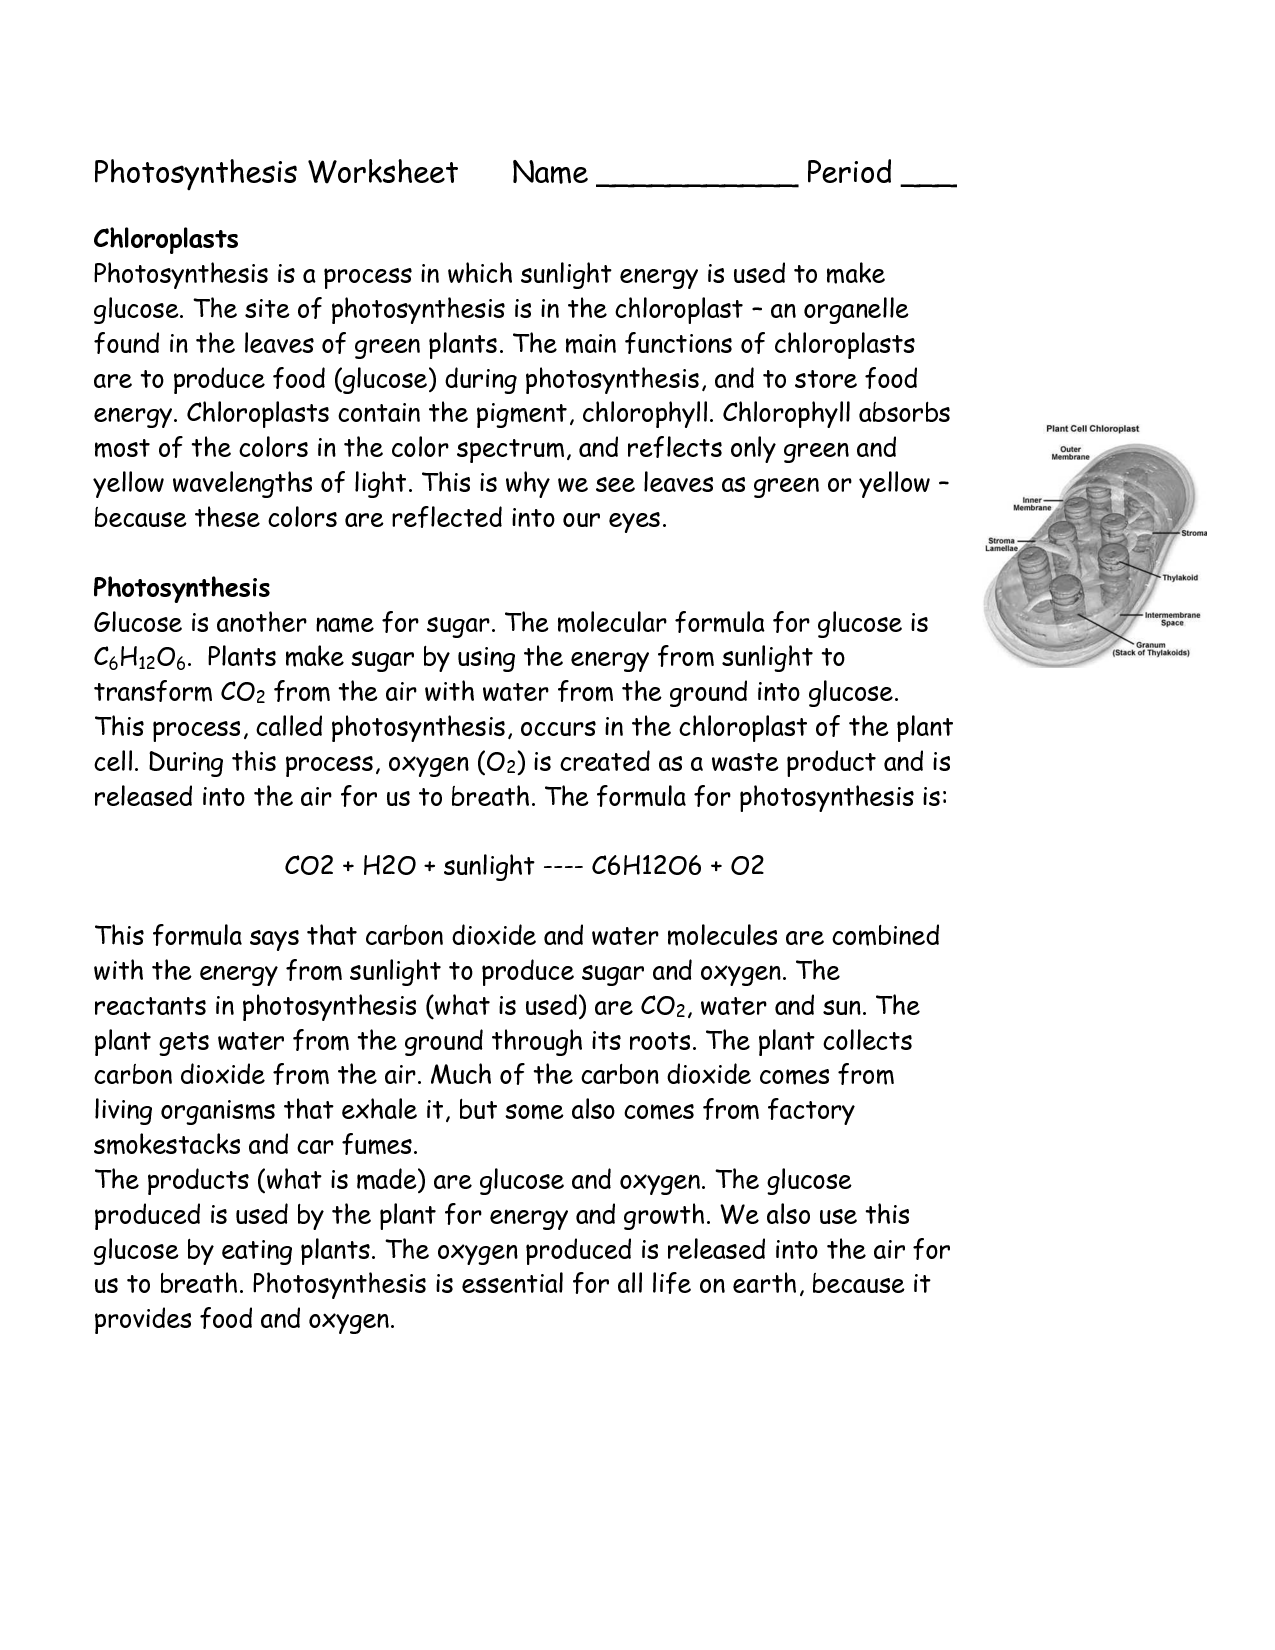 12-best-images-of-photosynthesis-diagrams-worksheet-answer-key-photosynthesis-diagram